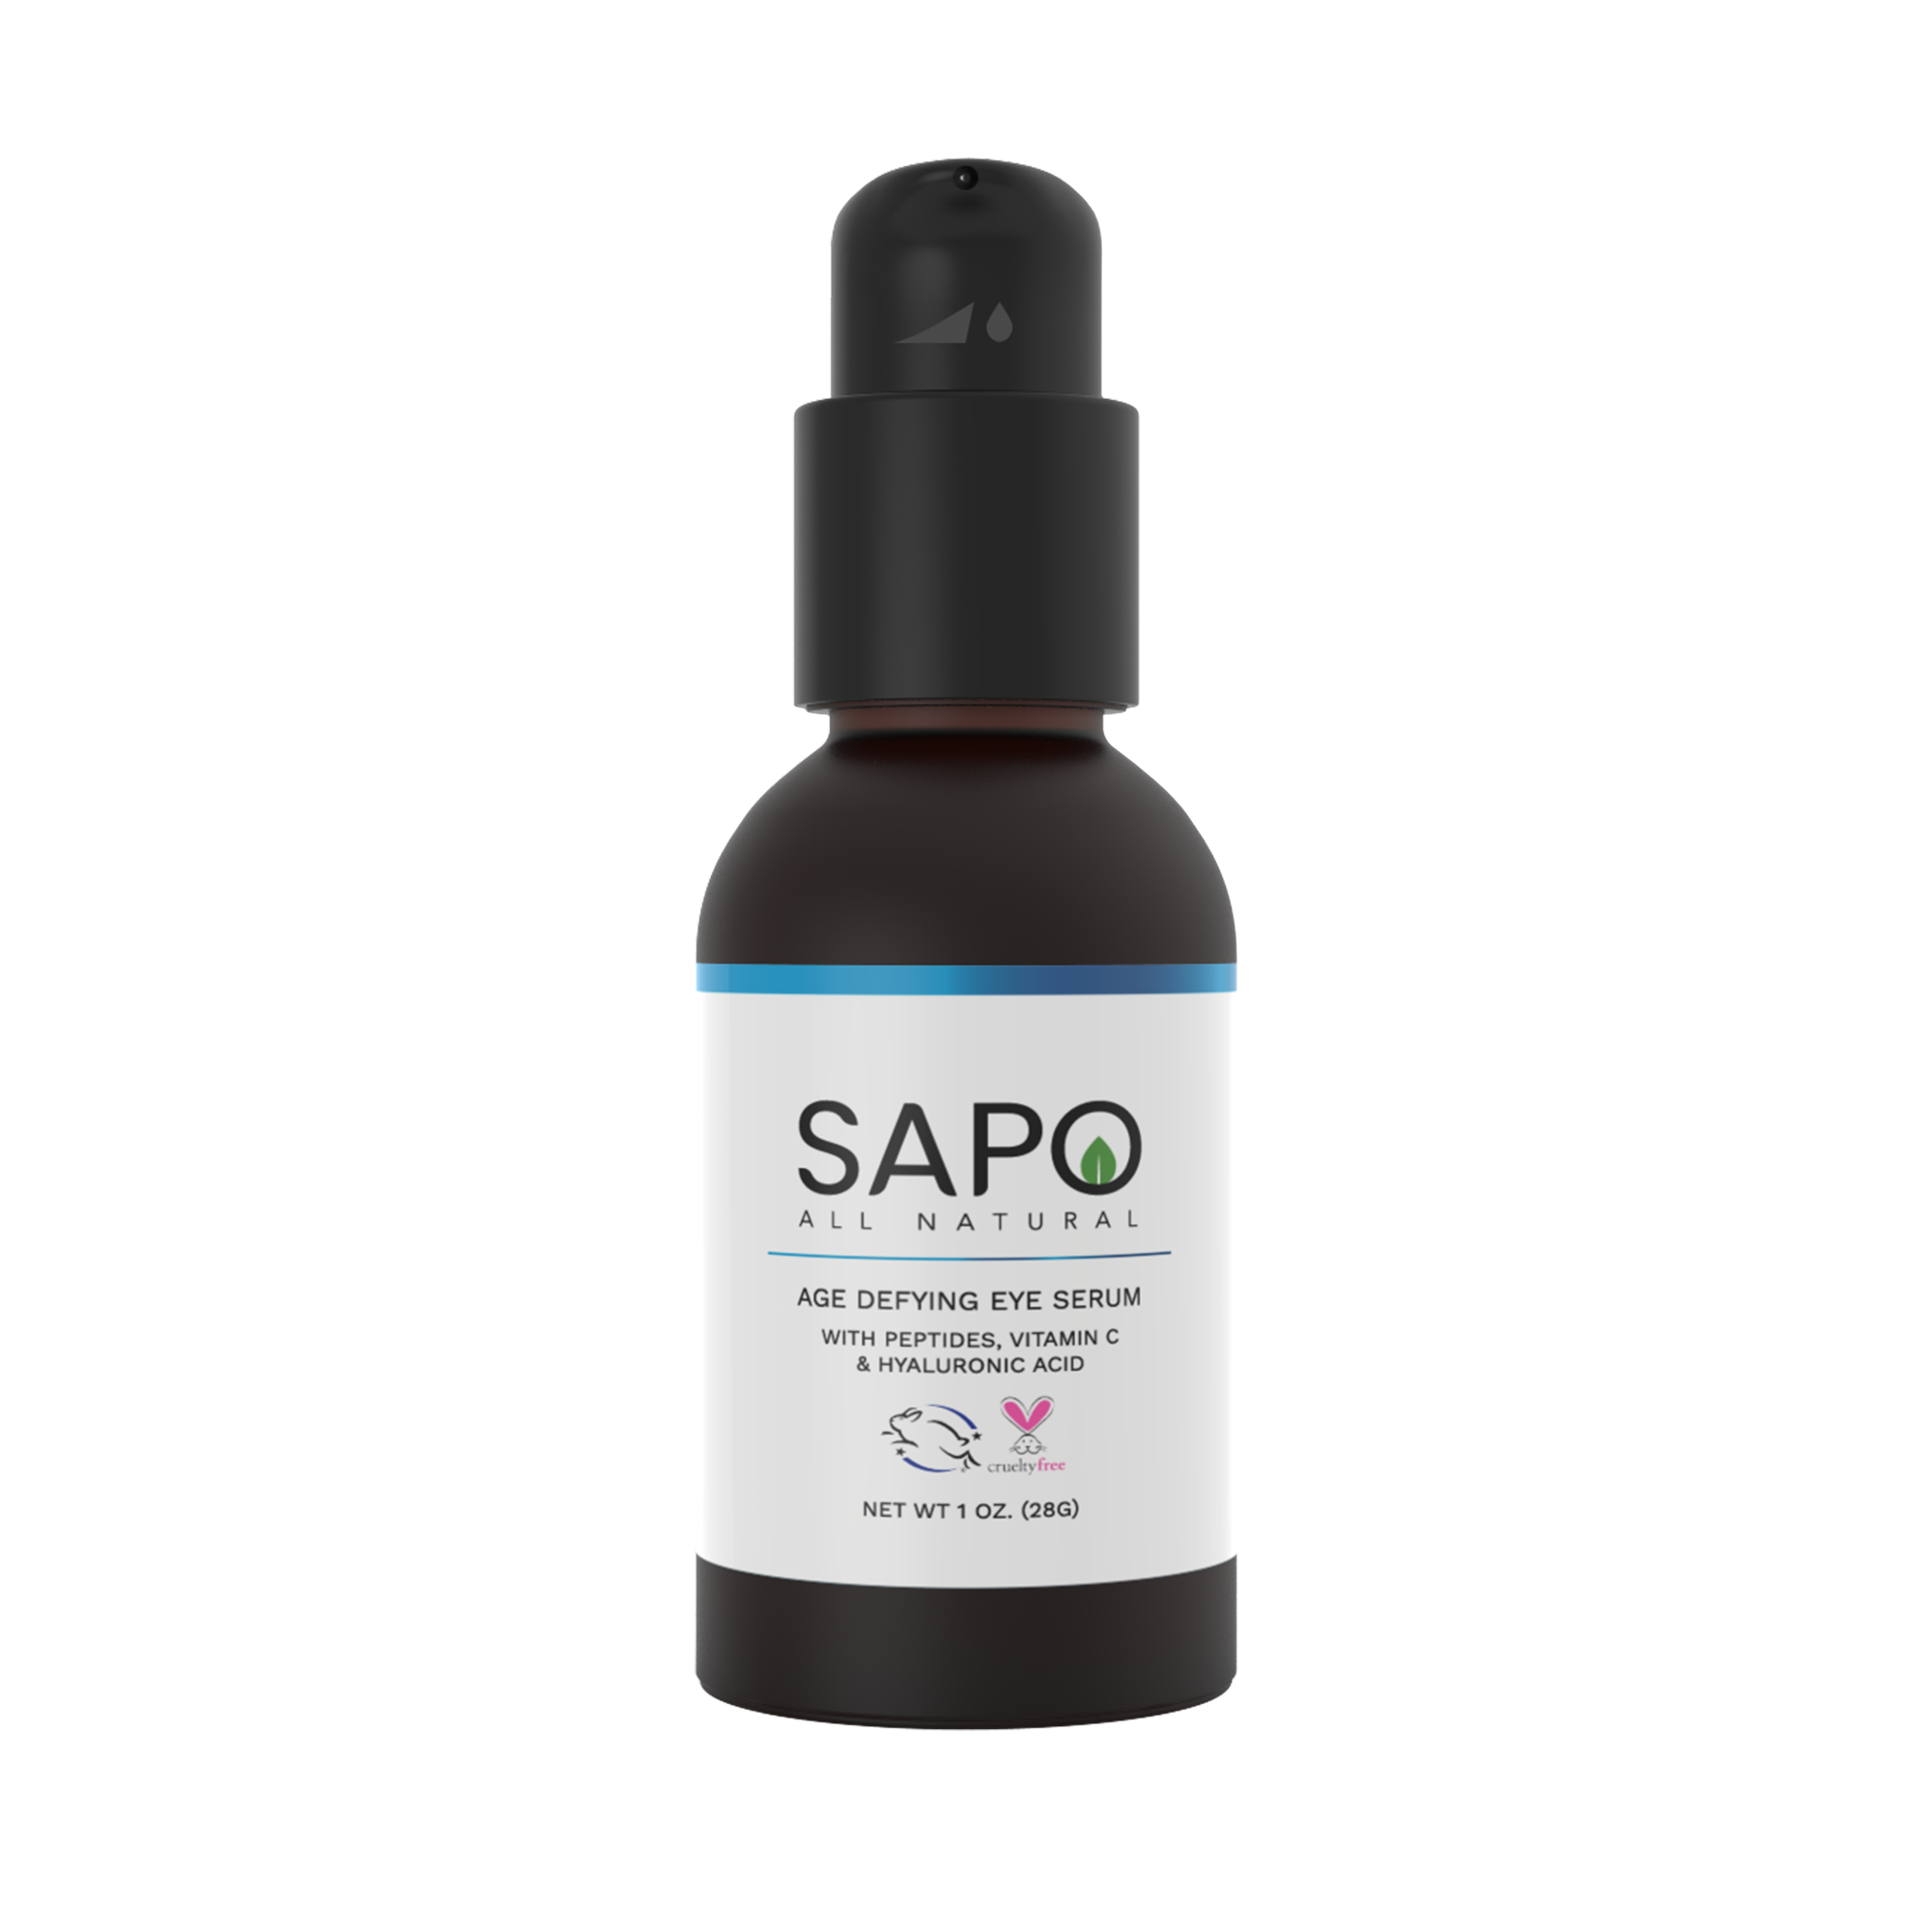 Sapo All Natural Eye Serum with Peptides and Hyaluronic Acid